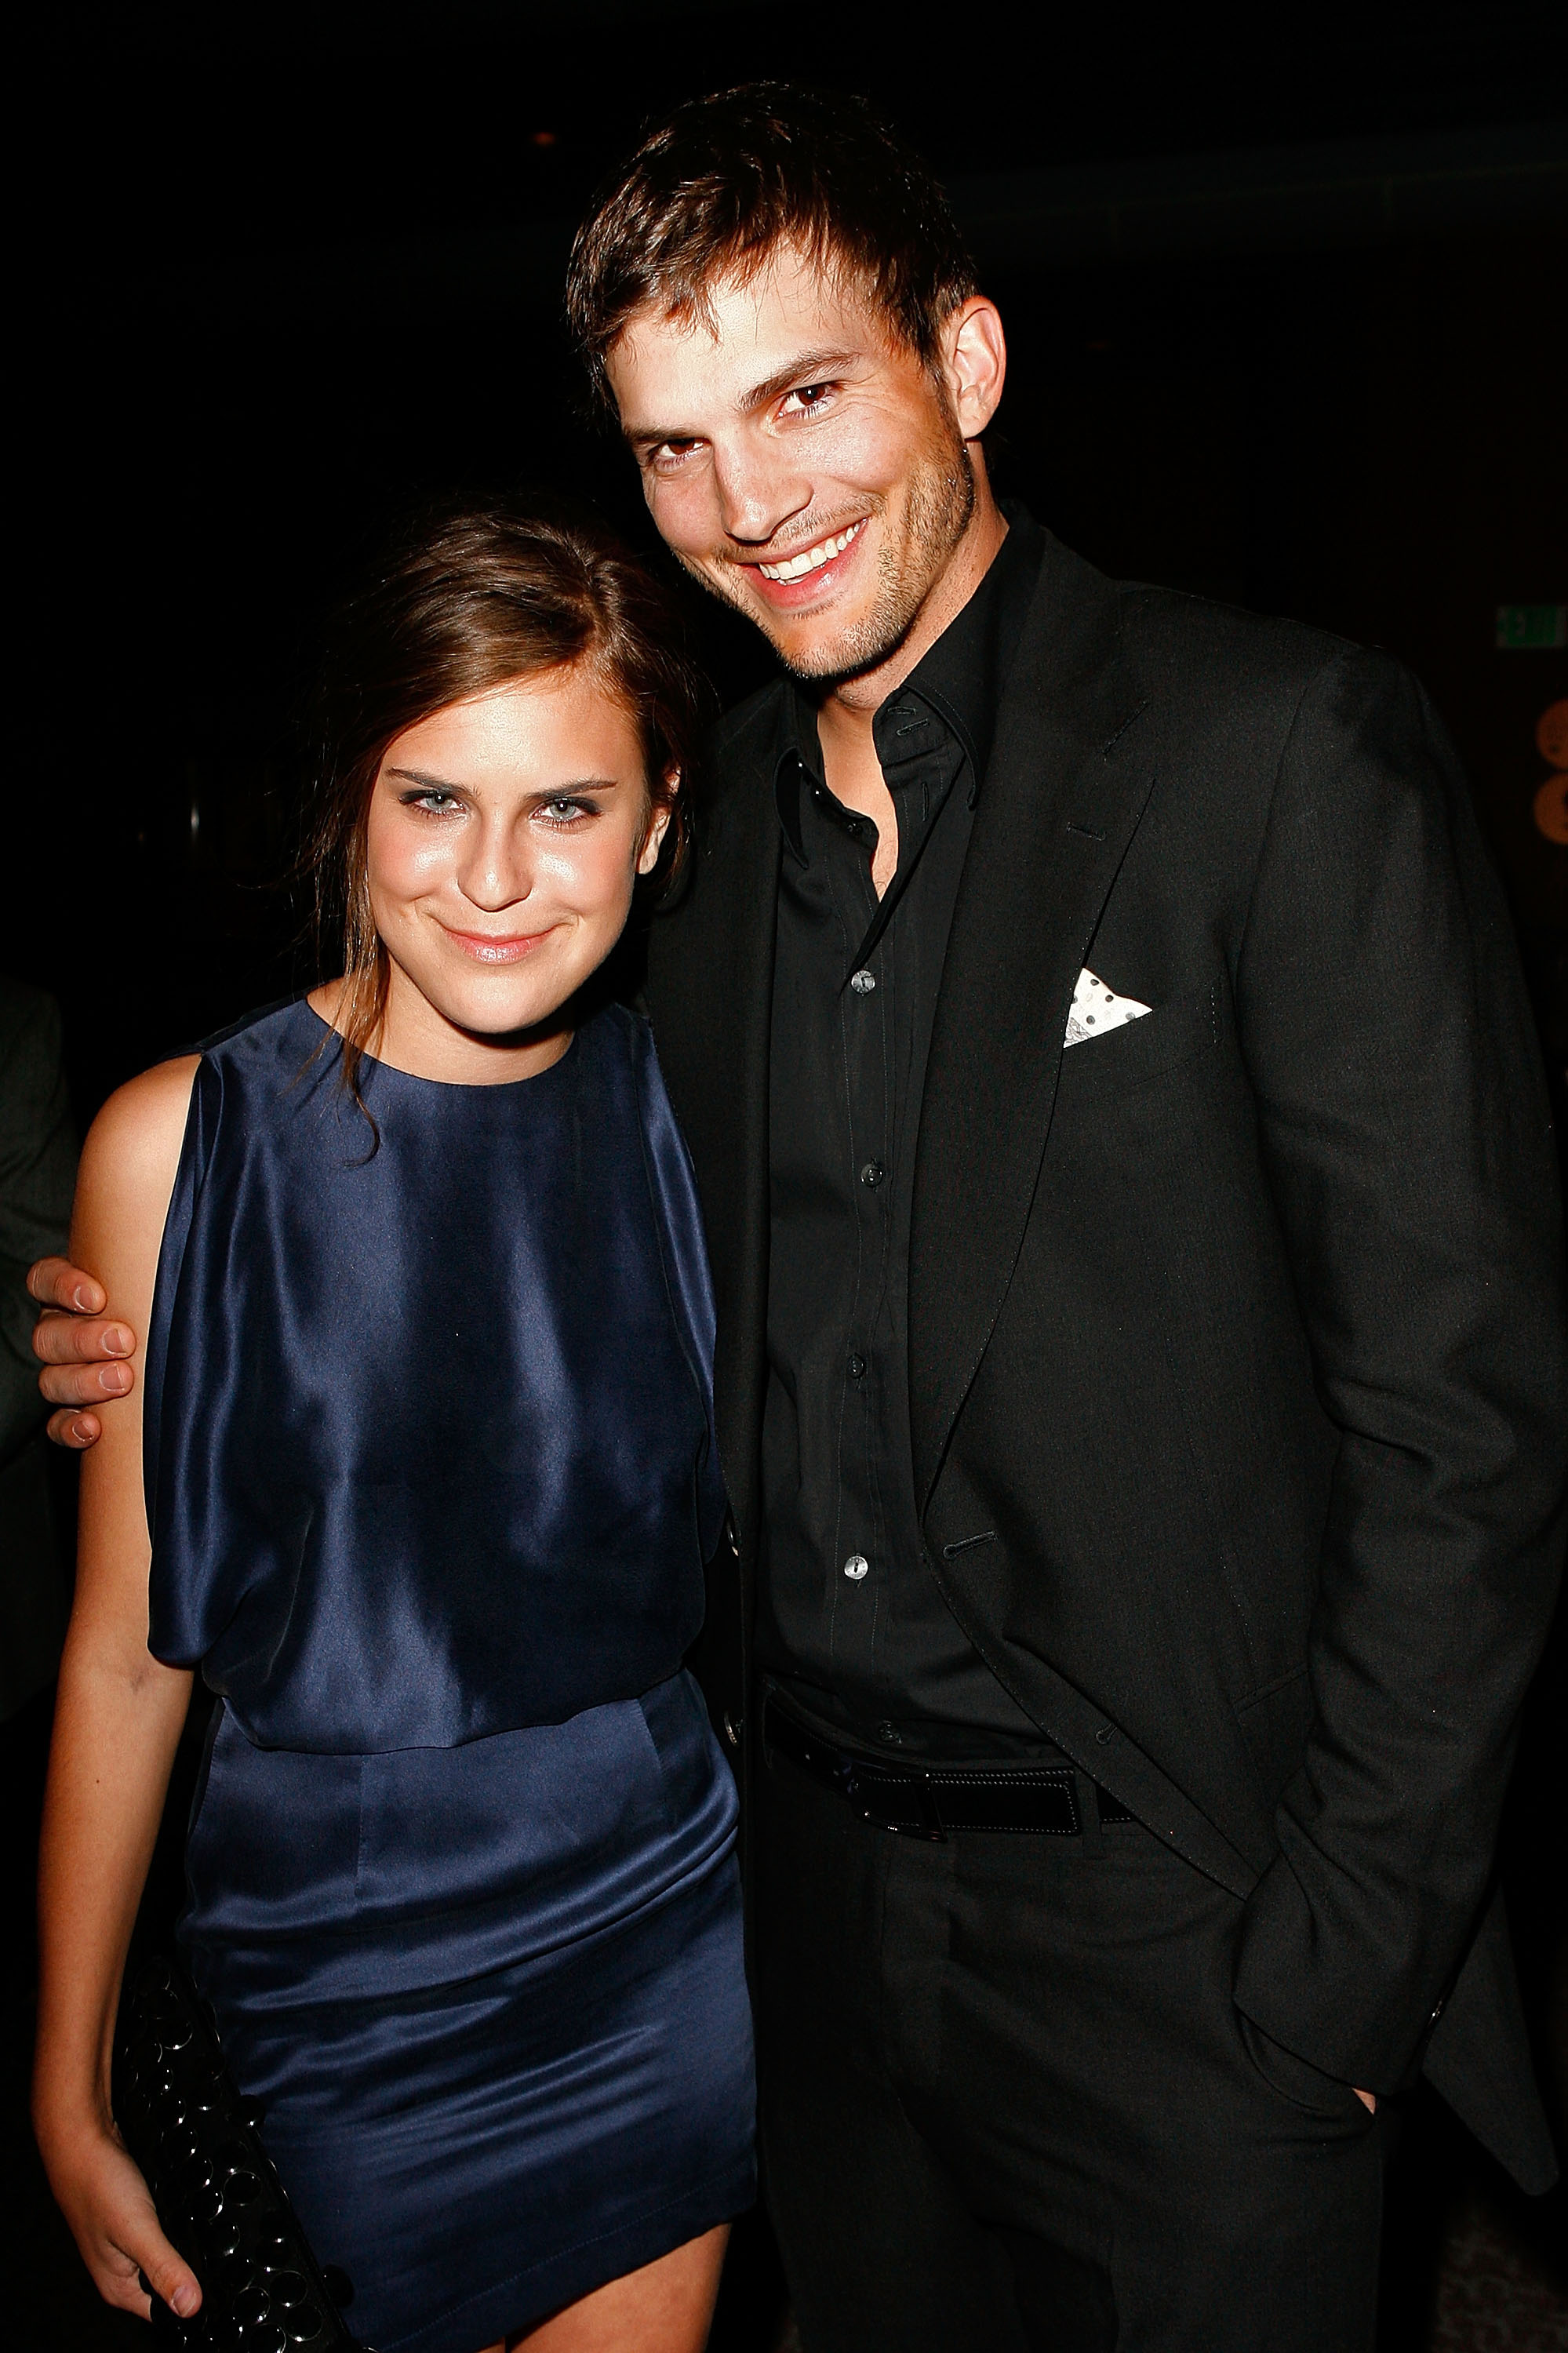 Tallulah Belle Willis and Ashton Kutcher at the premiere of Glamour Reel Moments presented by Suave on October 14, 2008, in Los Angeles, California | Source: Getty Images